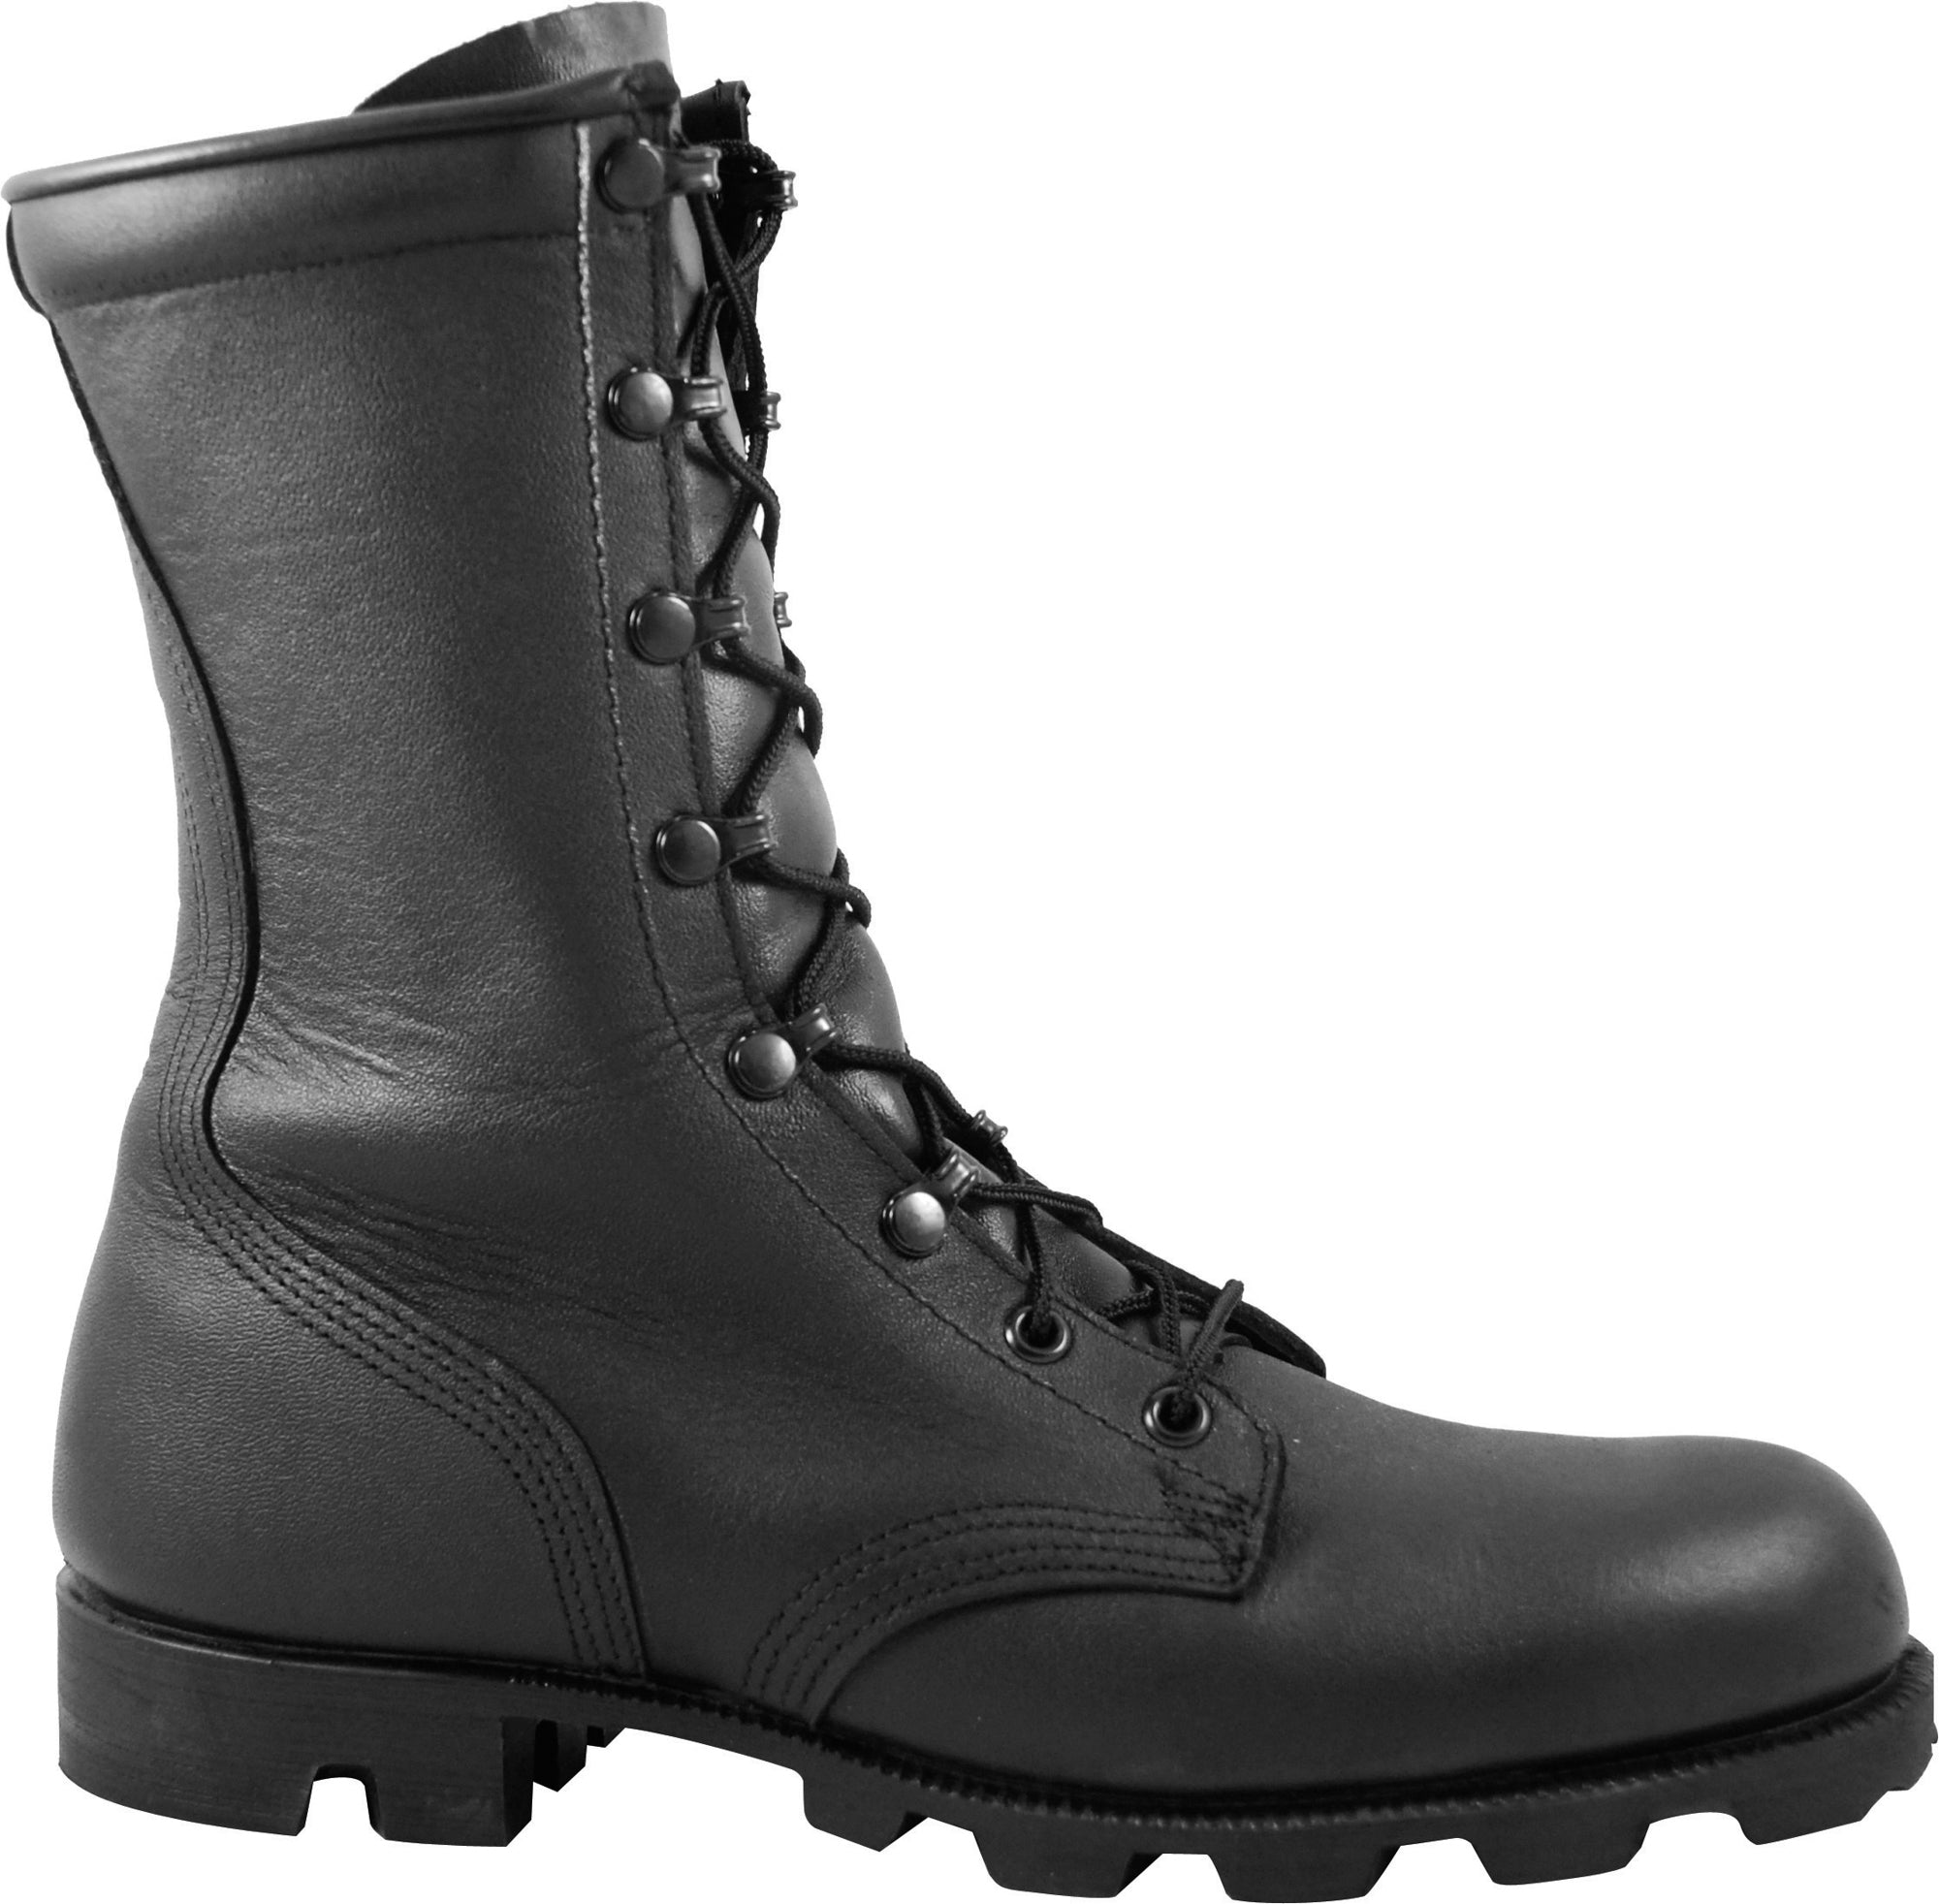 Mcrae Army Boots - Army Military